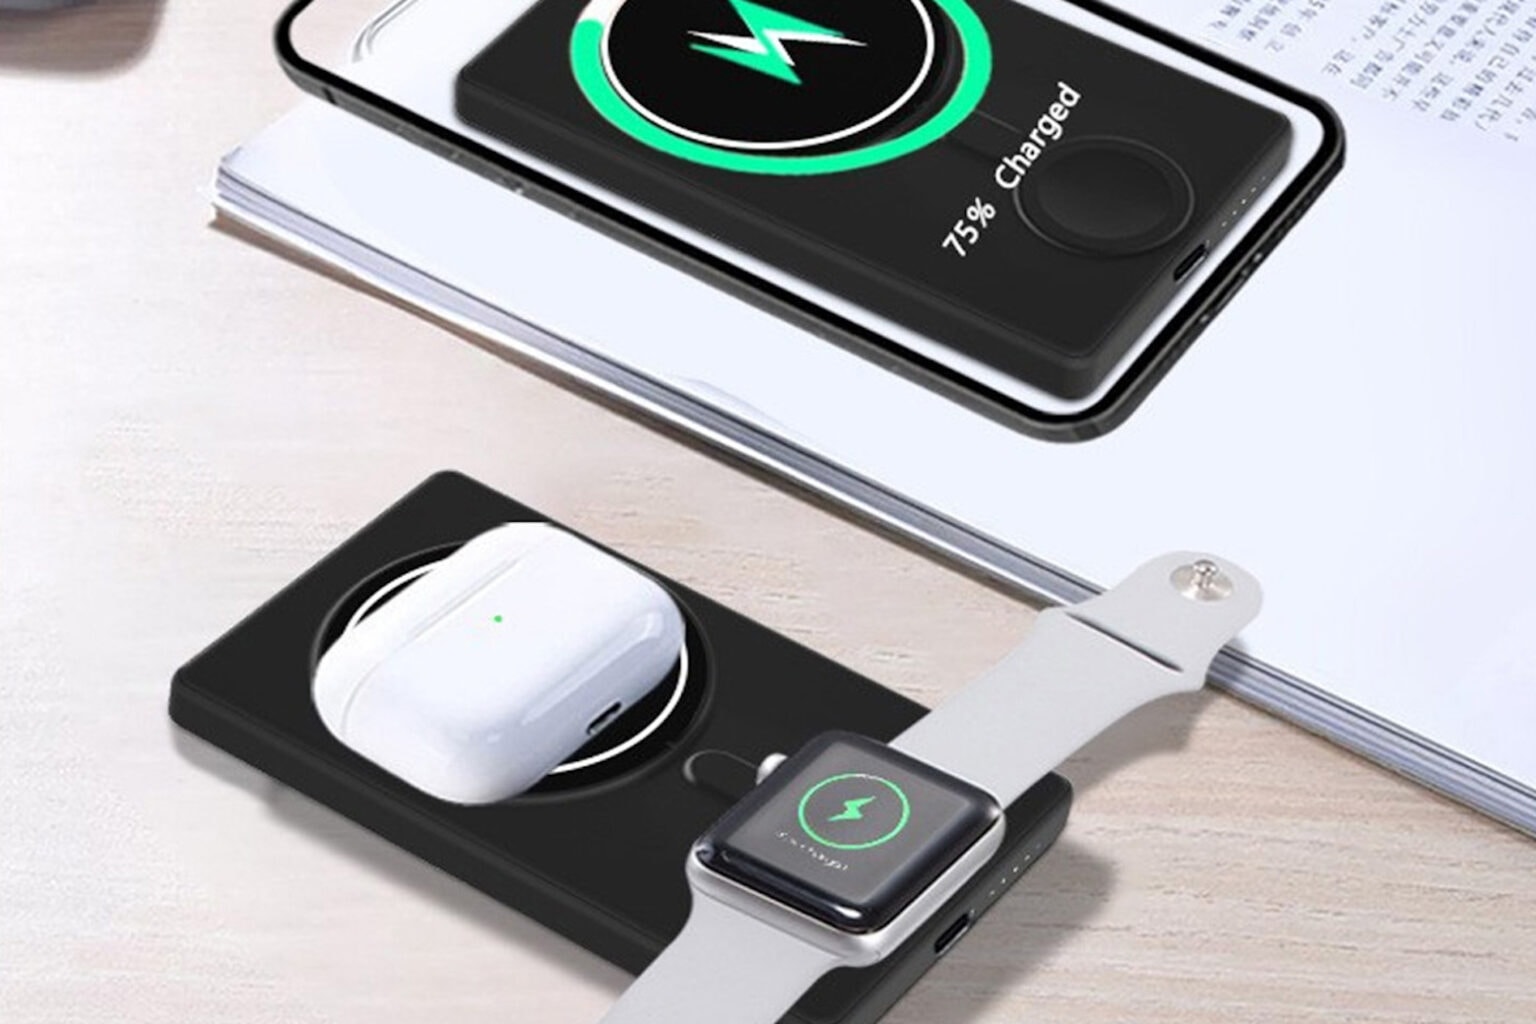 Save $80 in a wireless charging solution that can power three devices simultaneously.